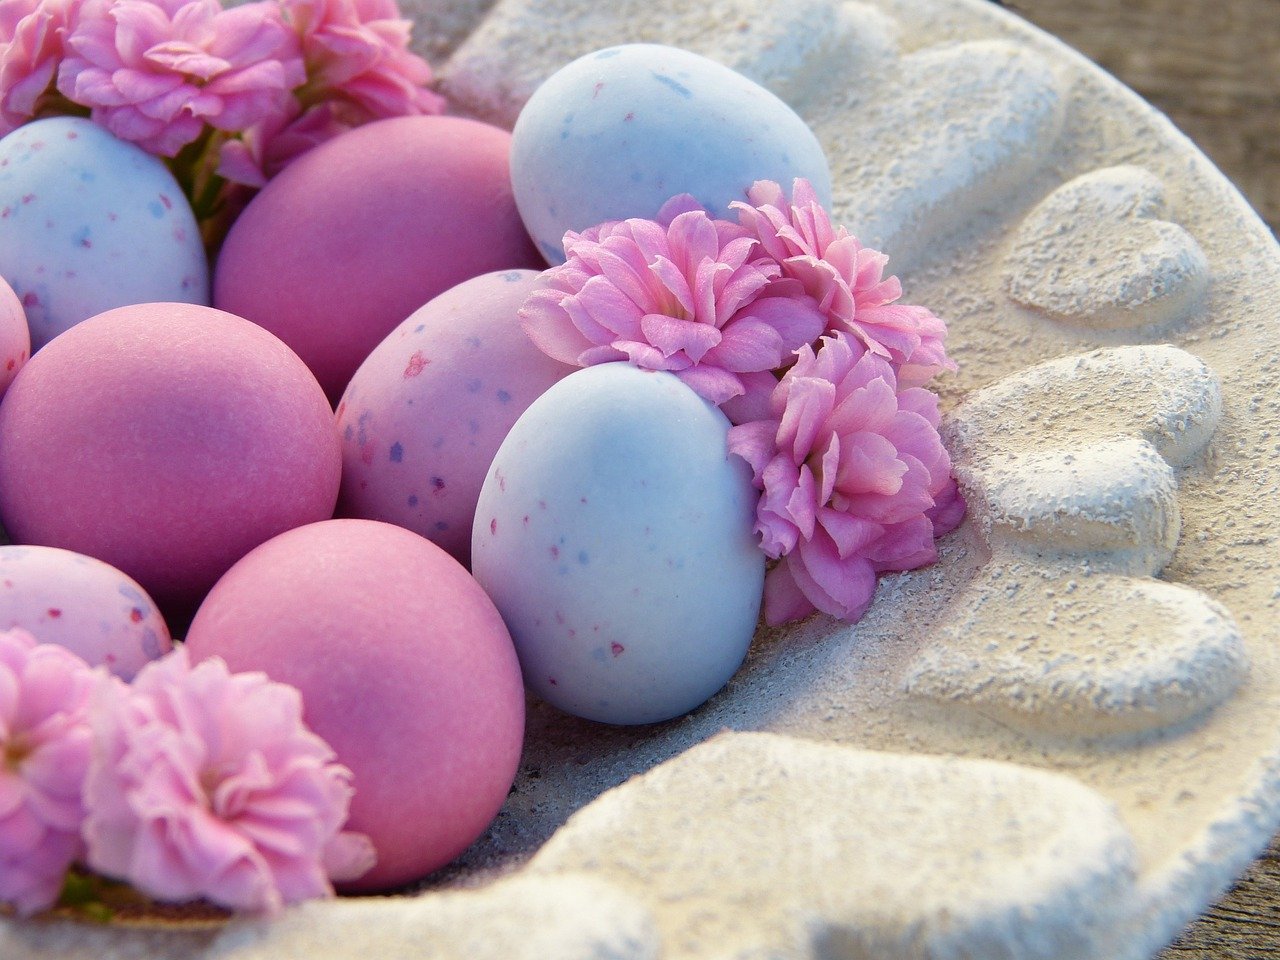 How to decorate your home for Easter?